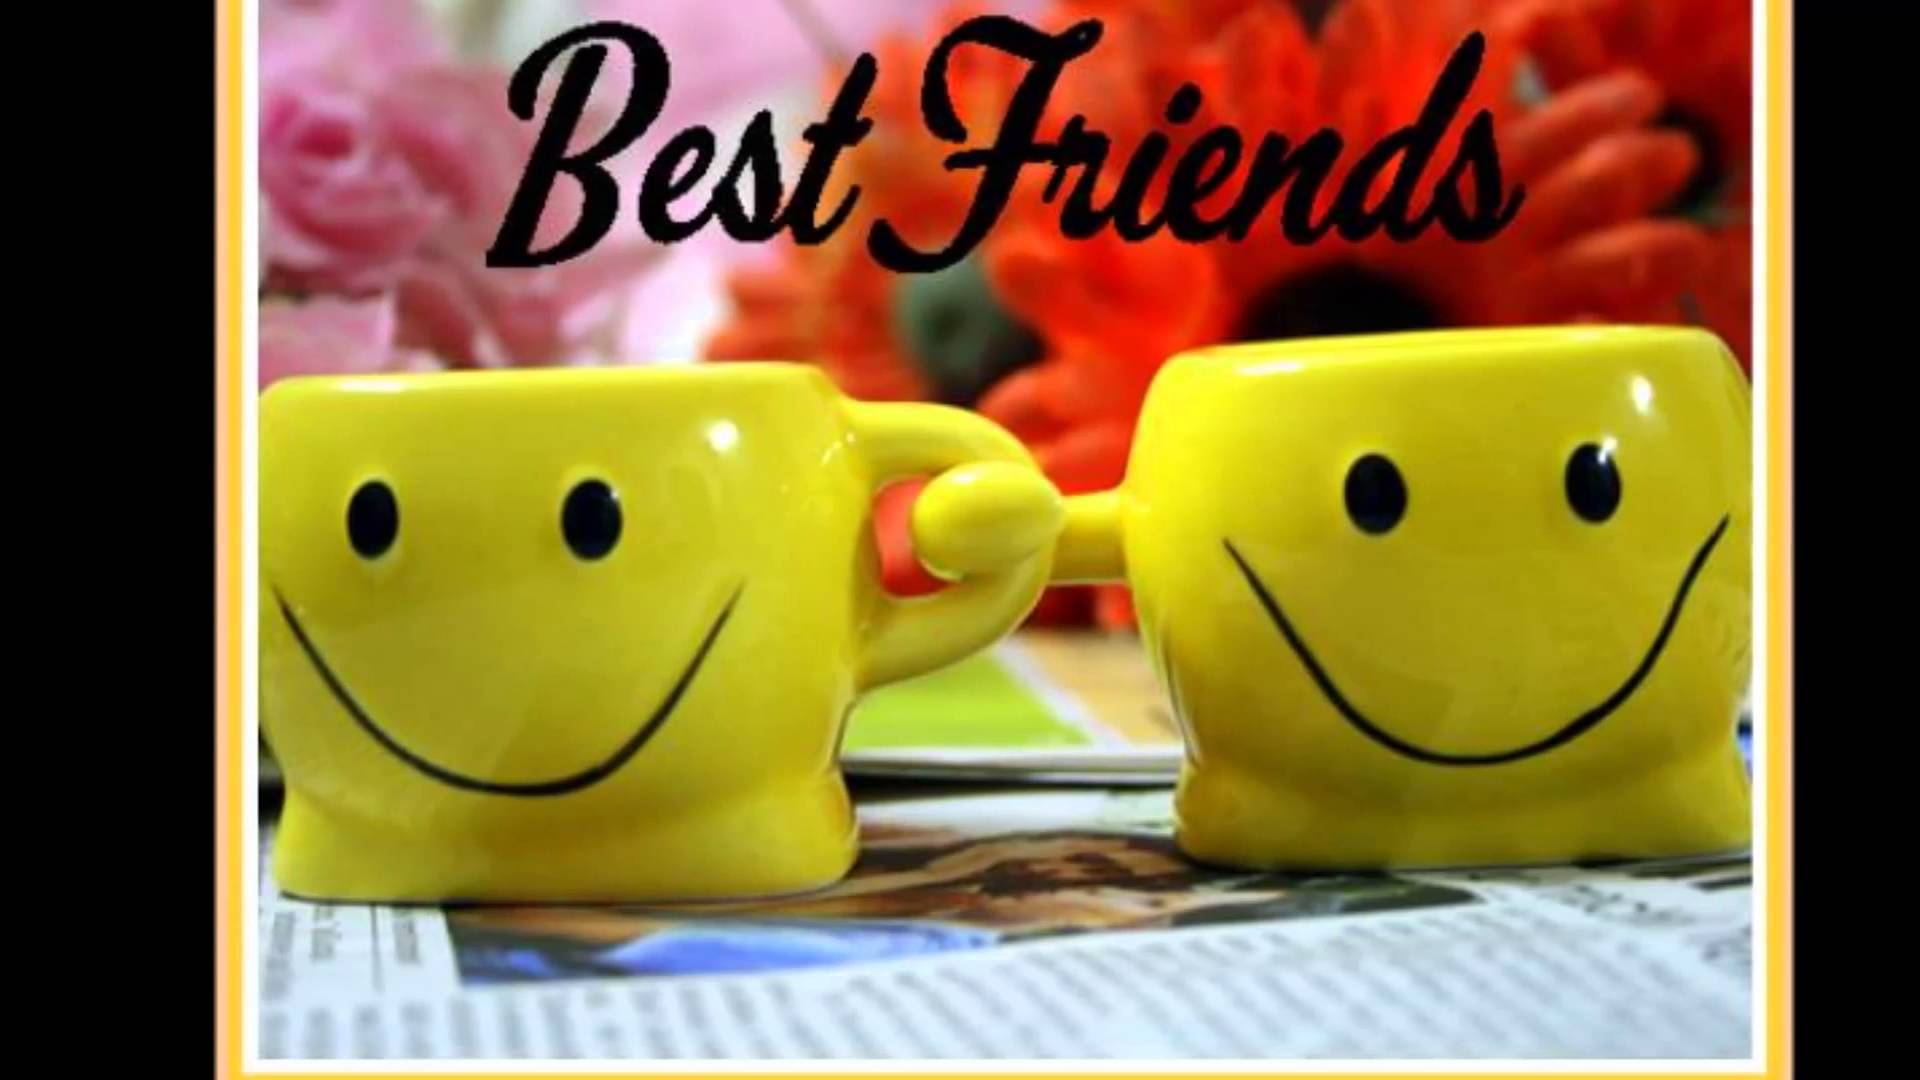 latest wallpaper of friendship,facial expression,yellow,smile,font,smiley